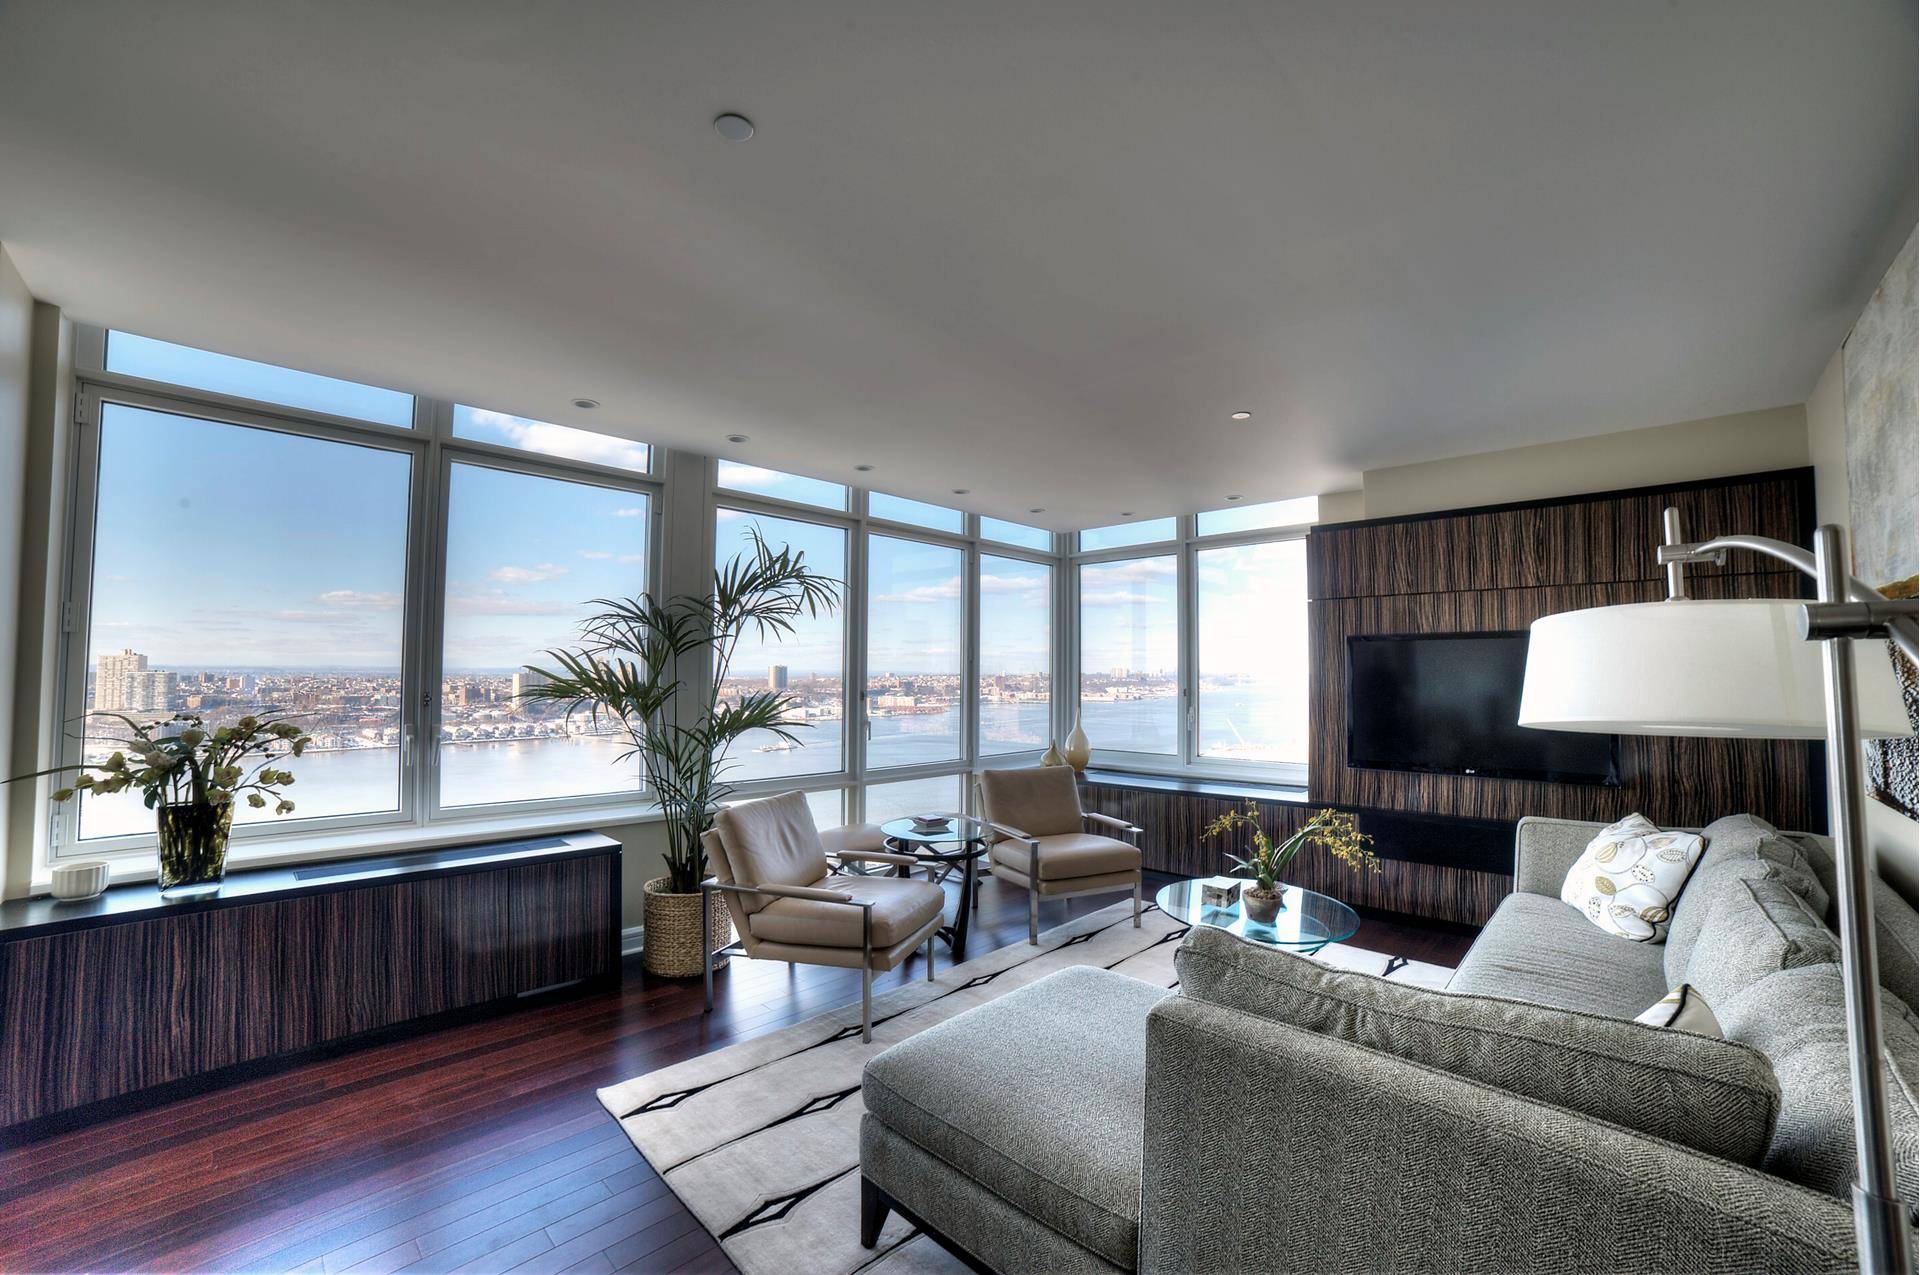 Beautifully furnished and decorated 3 bedroom, 3 1 2 bathroom on the 38th floor of the Rushmore.